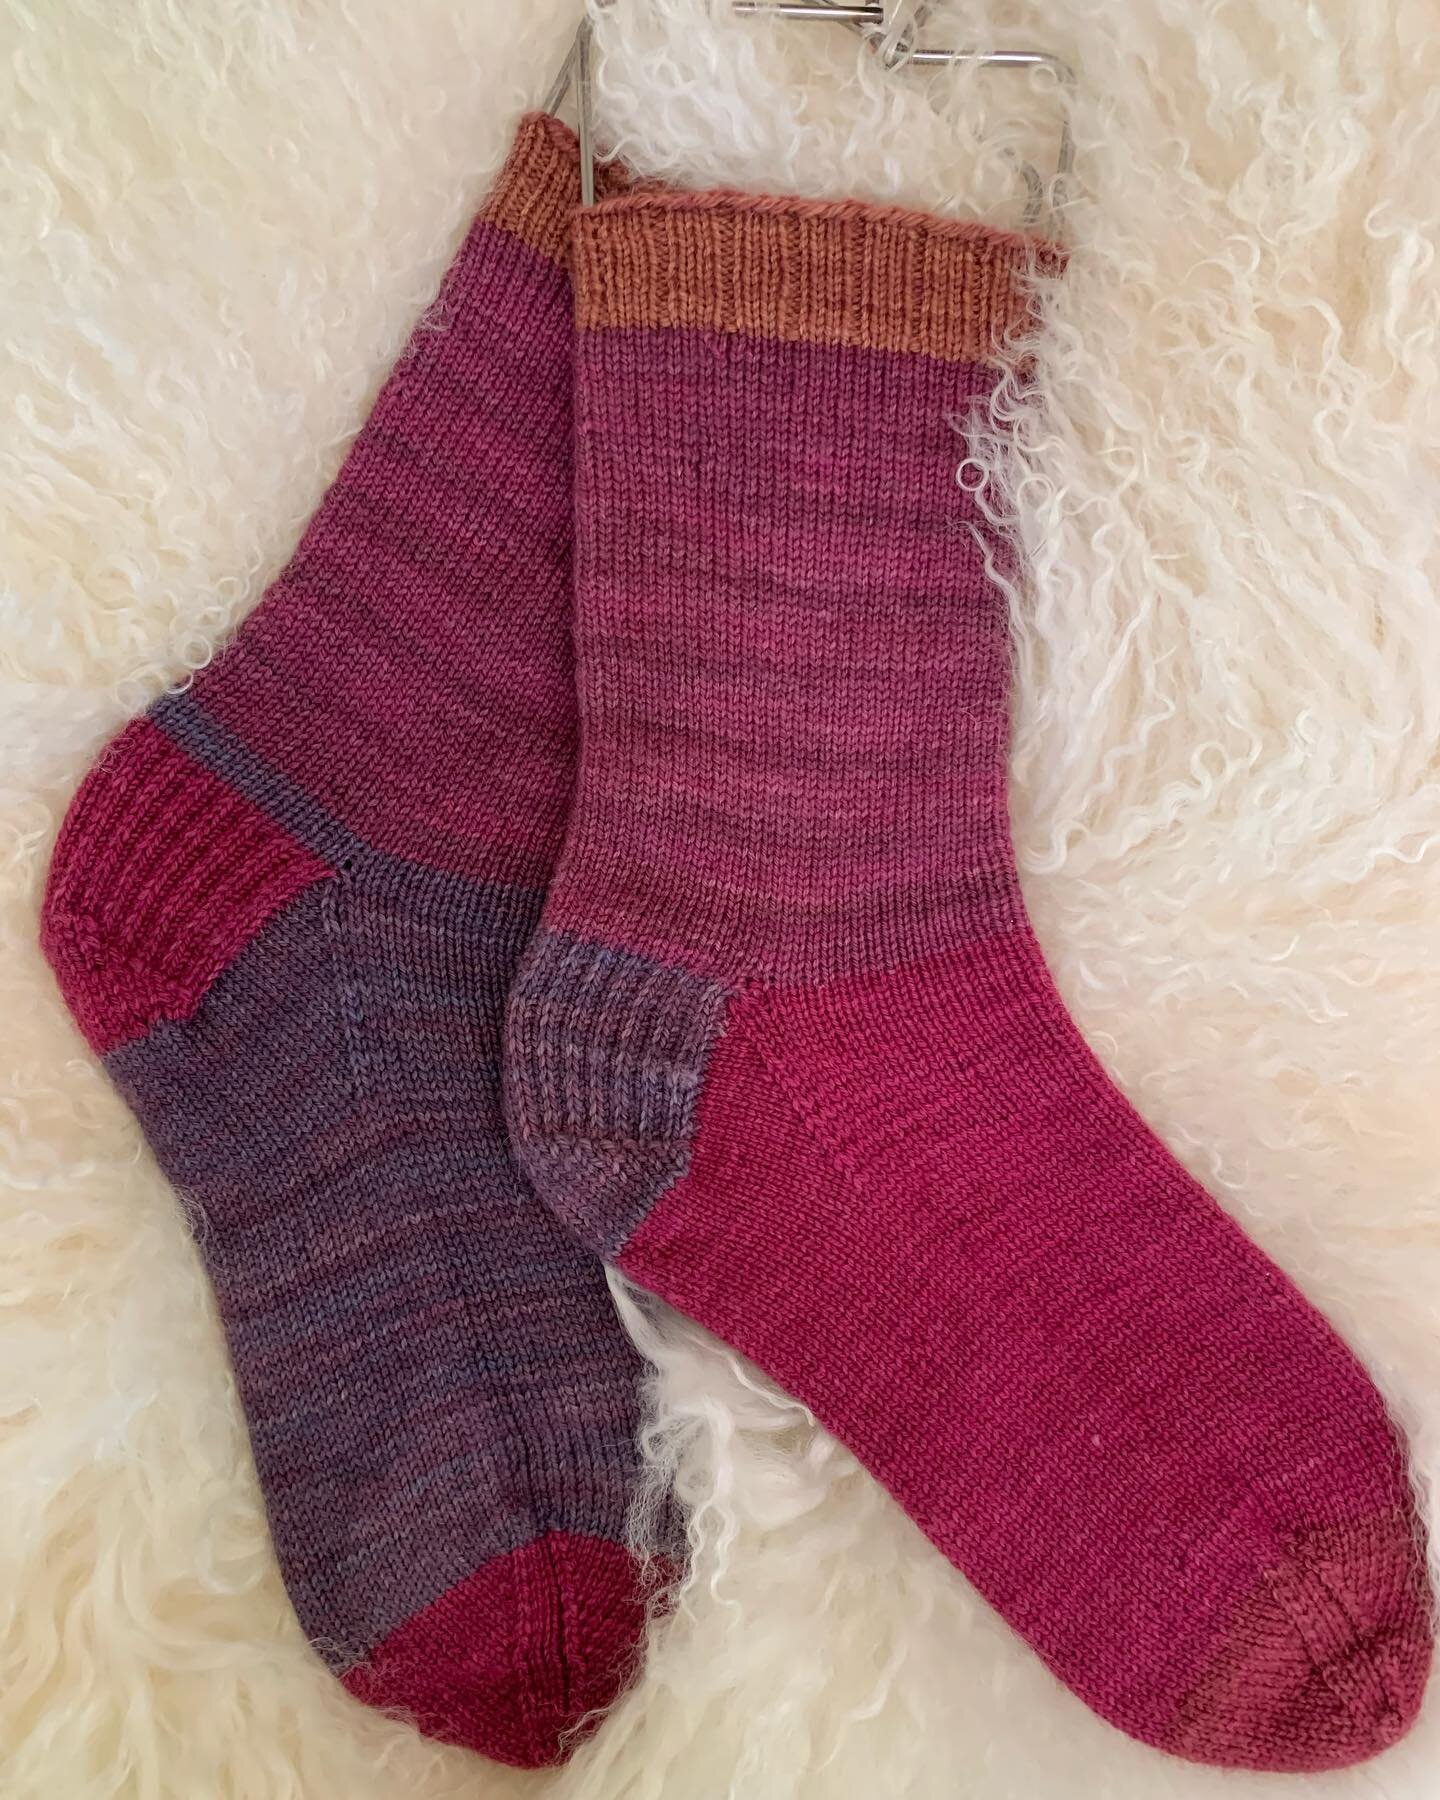 Diana&rsquo;s birthday socks. A little late but turned out great! This yarn is @sweetgeorgia Tough Love Sock, Party of Five. This is a great sock yarn, would be awesome paired with a full skein for a shawl. #sweetgeorgiayarns  #sockknitting  #sockkni